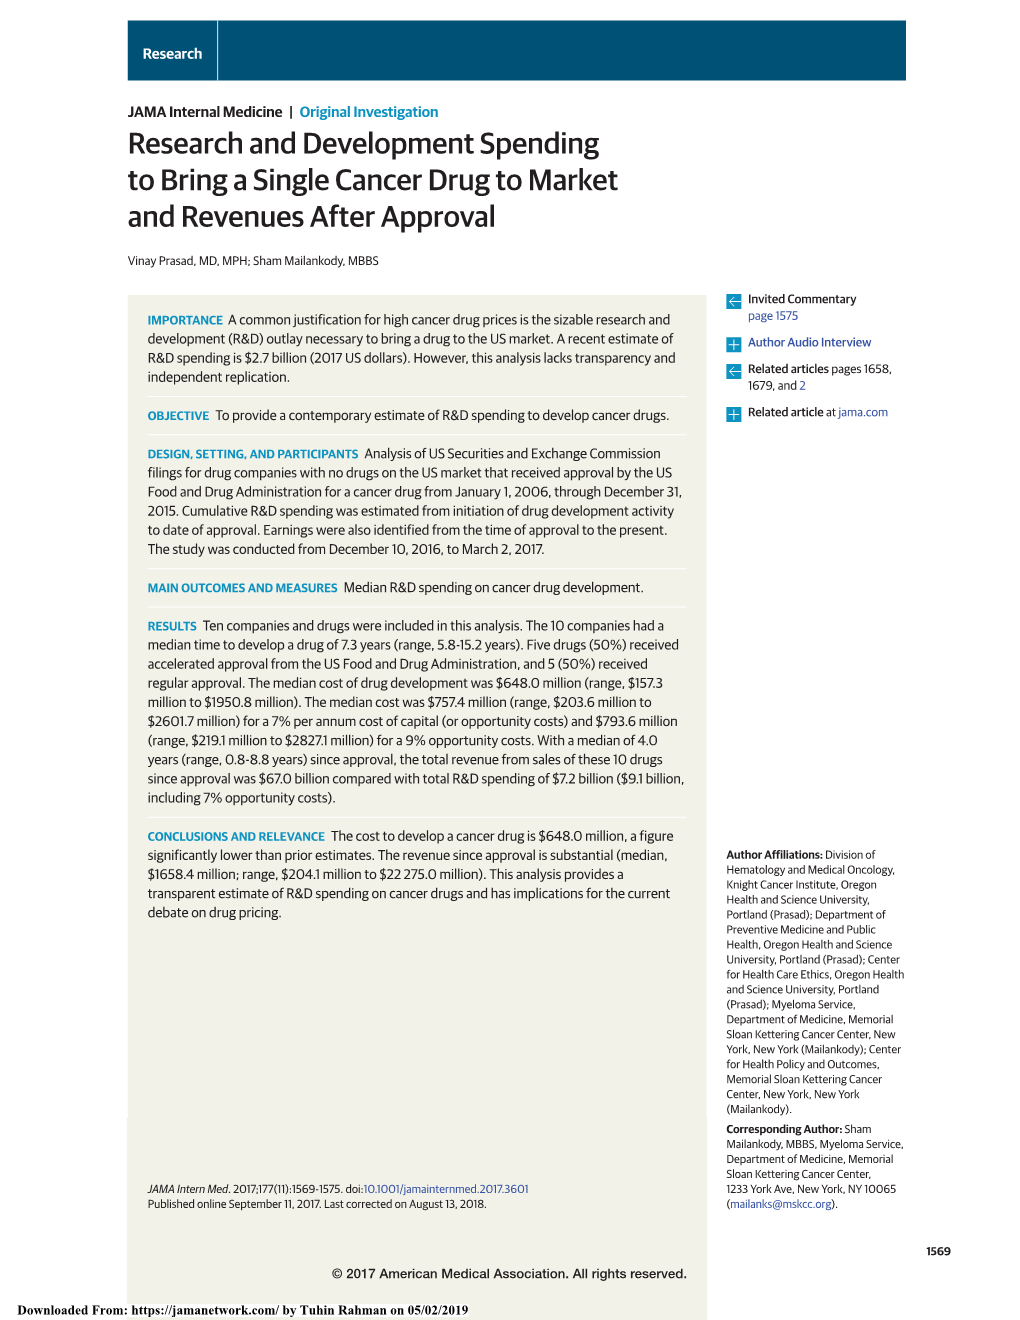 Research and Development Spending to Bring a Single Cancer Drug to Market and Revenues After Approval